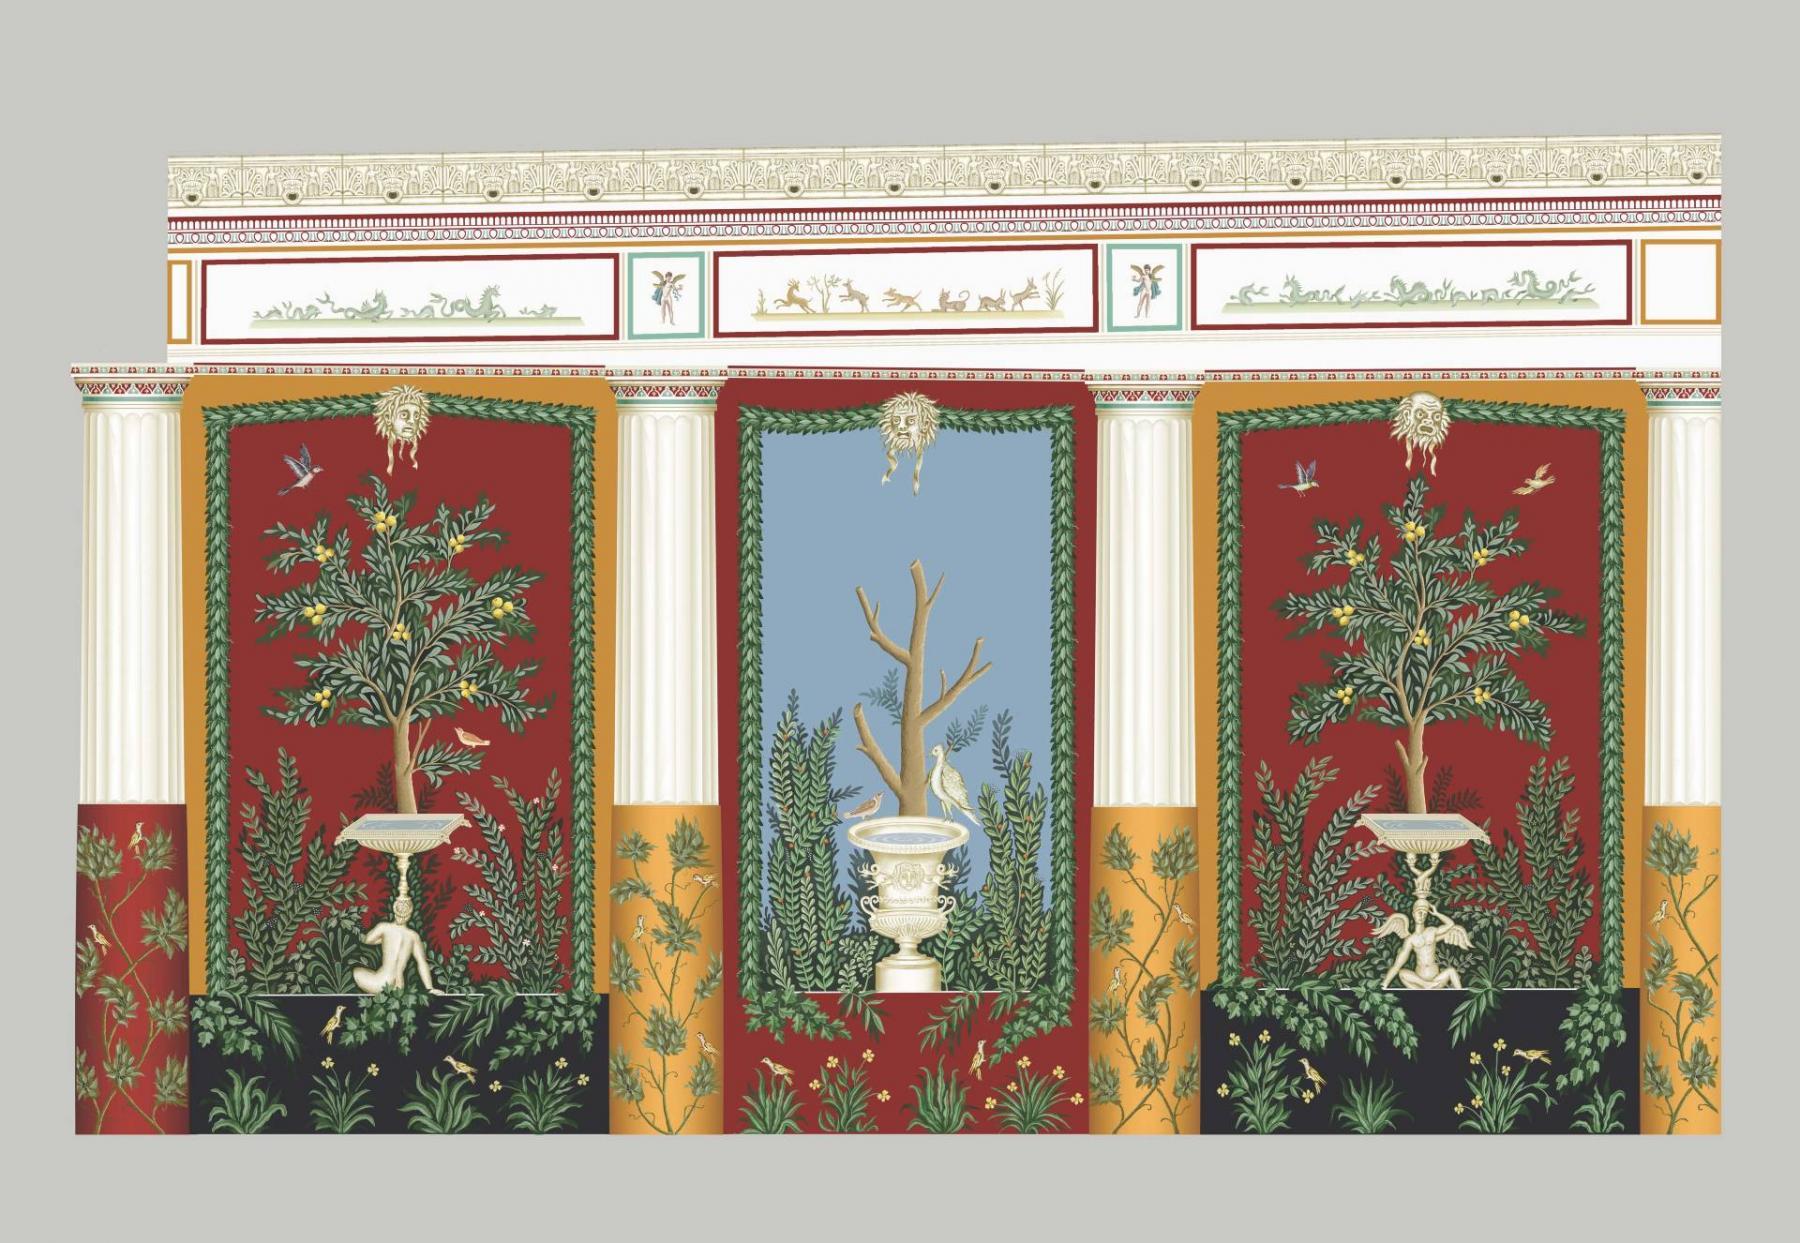 Garden painting in Villa A restored from archival photos. Digital drawing by Paolo Baronio 